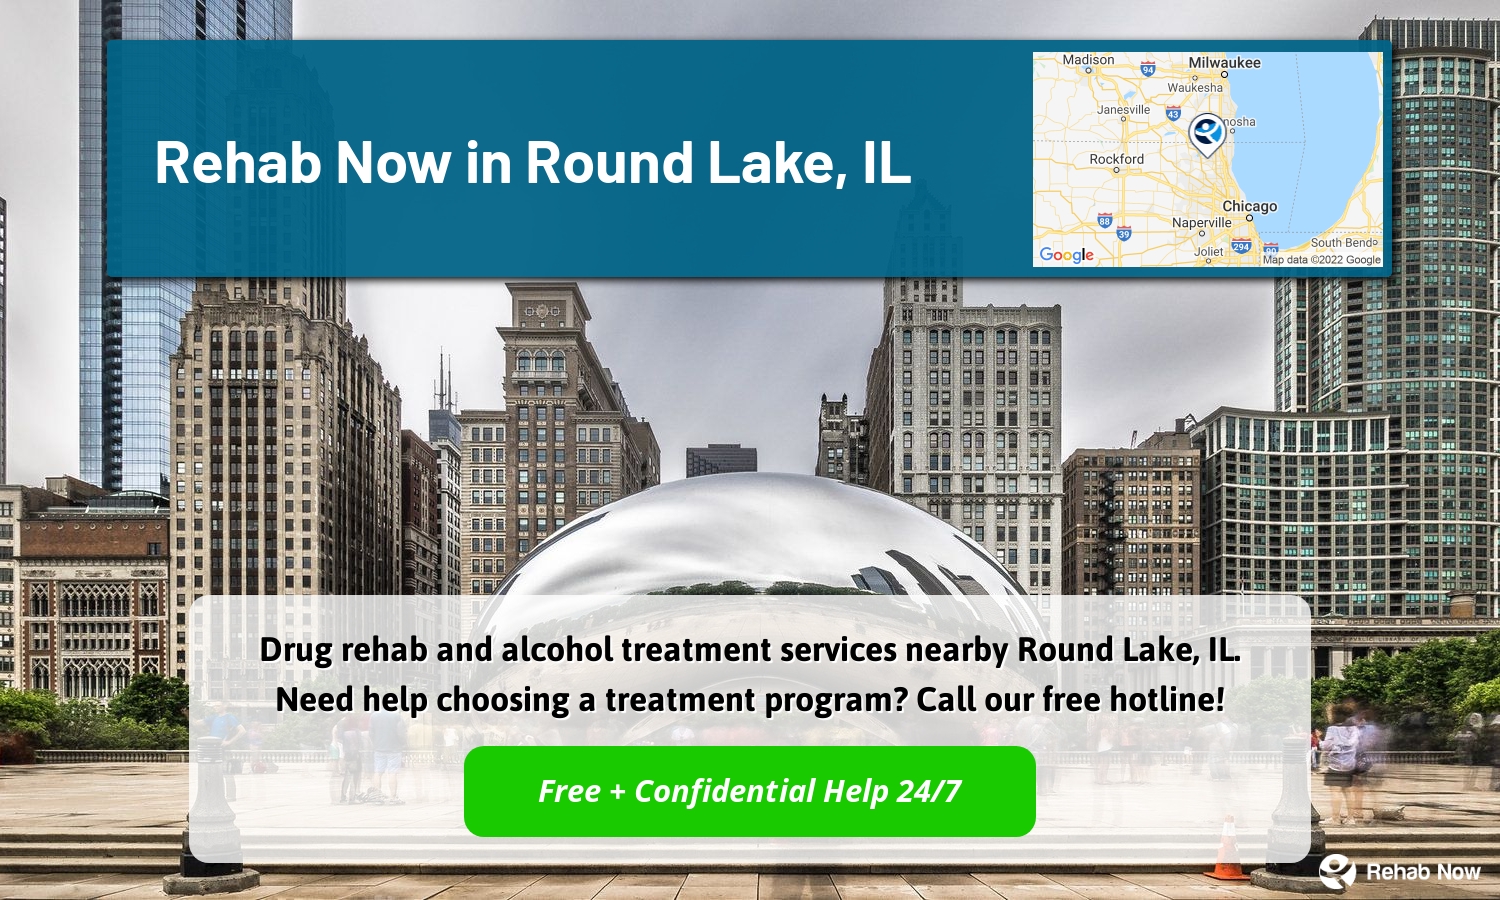 Drug rehab and alcohol treatment services nearby Round Lake, IL. Need help choosing a treatment program? Call our free hotline!